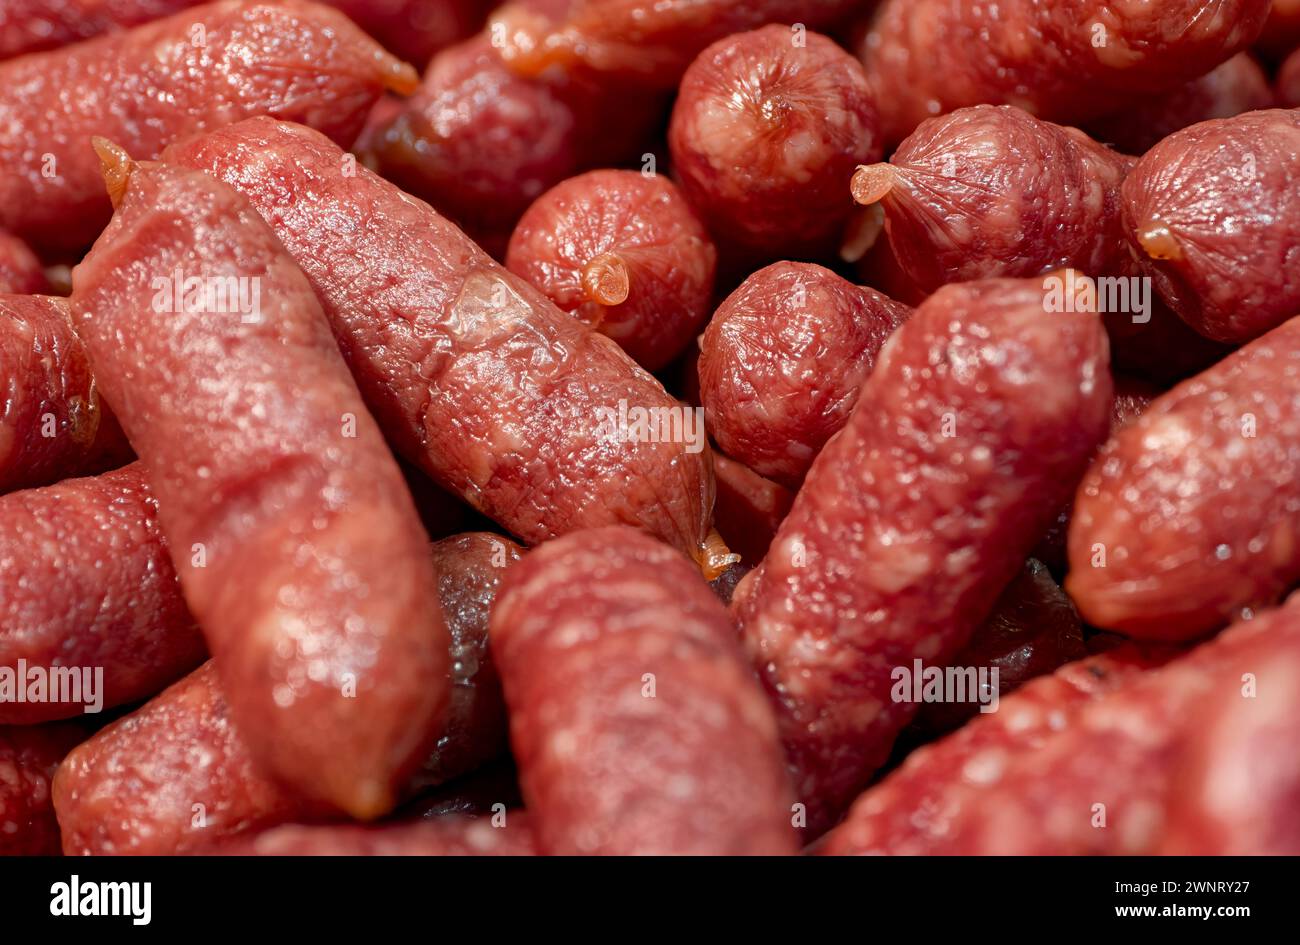 Smoked sausages on a meat market counter, close-up shot, abstract food background Stock Photo